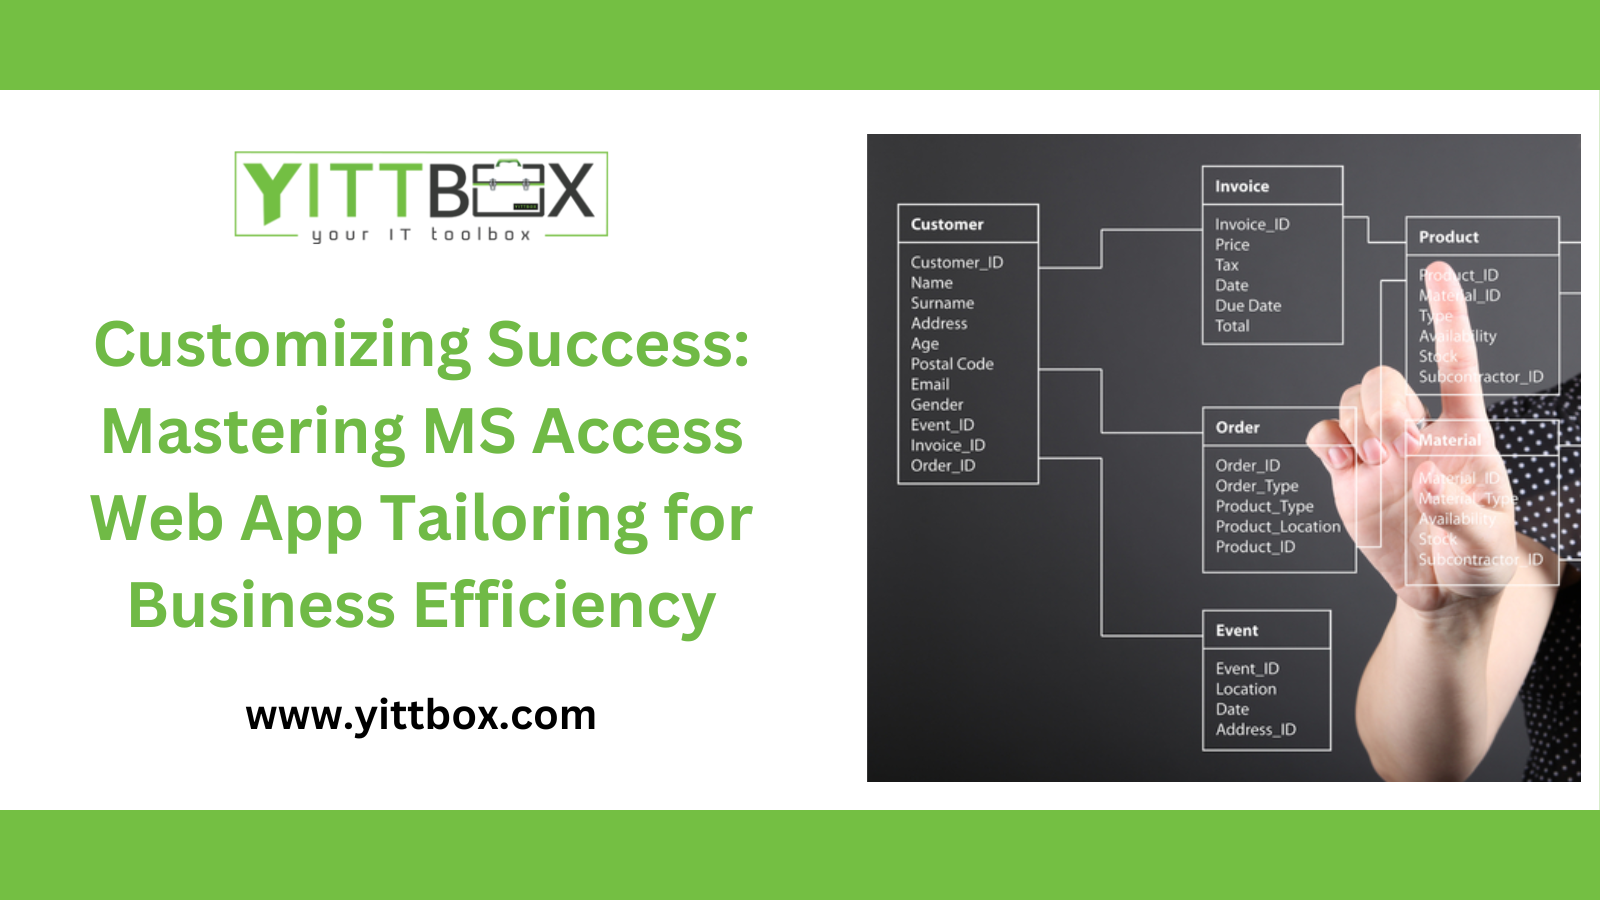 Customizing Success: Mastering MS Access Web App Tailoring for Business Efficiency